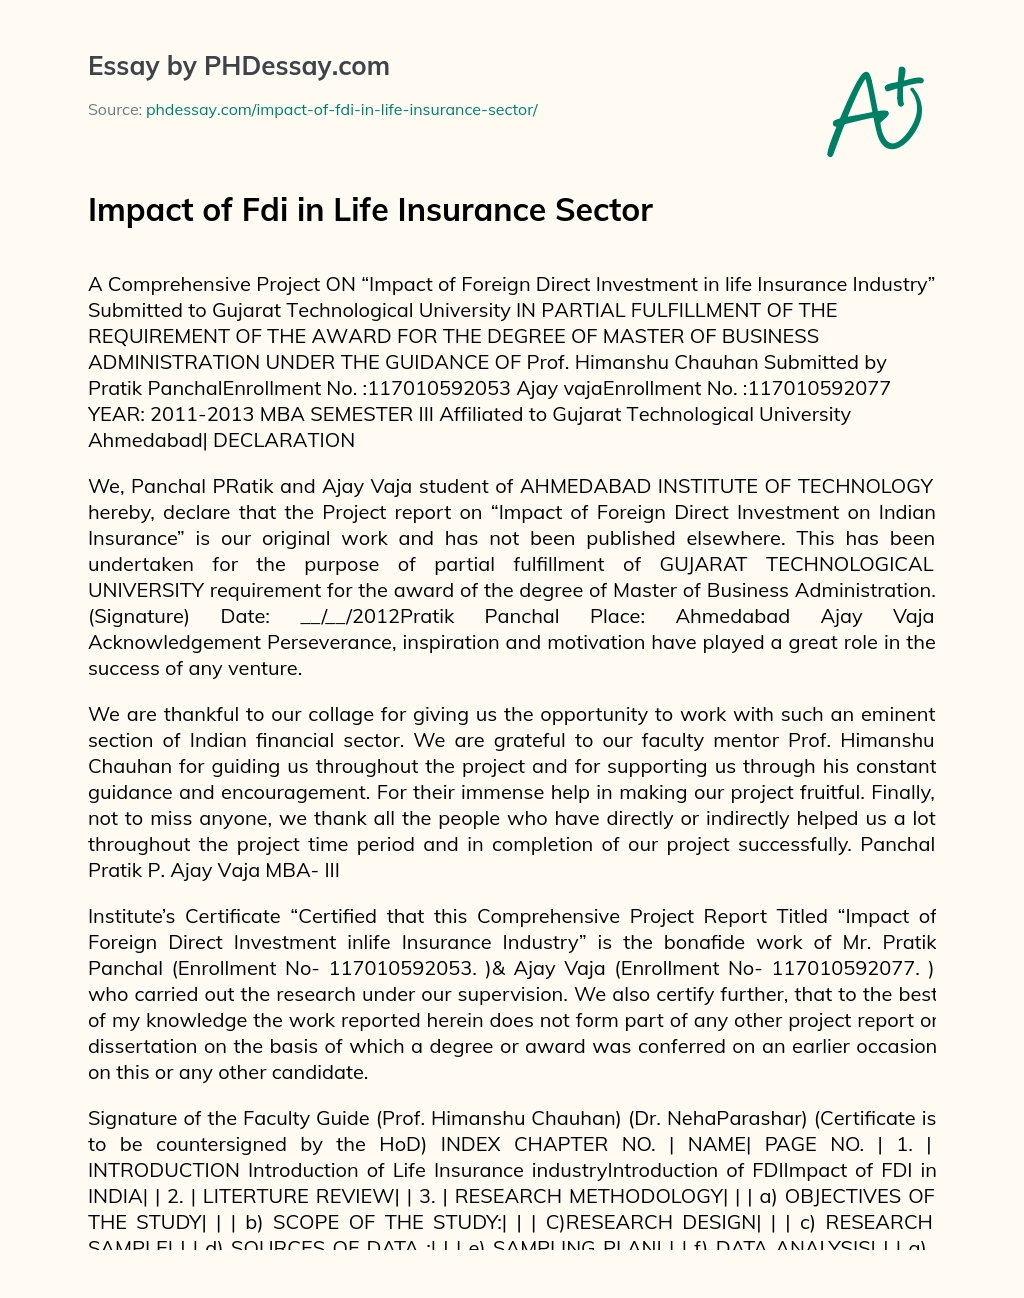 Impact of Fdi in Life Insurance Sector essay